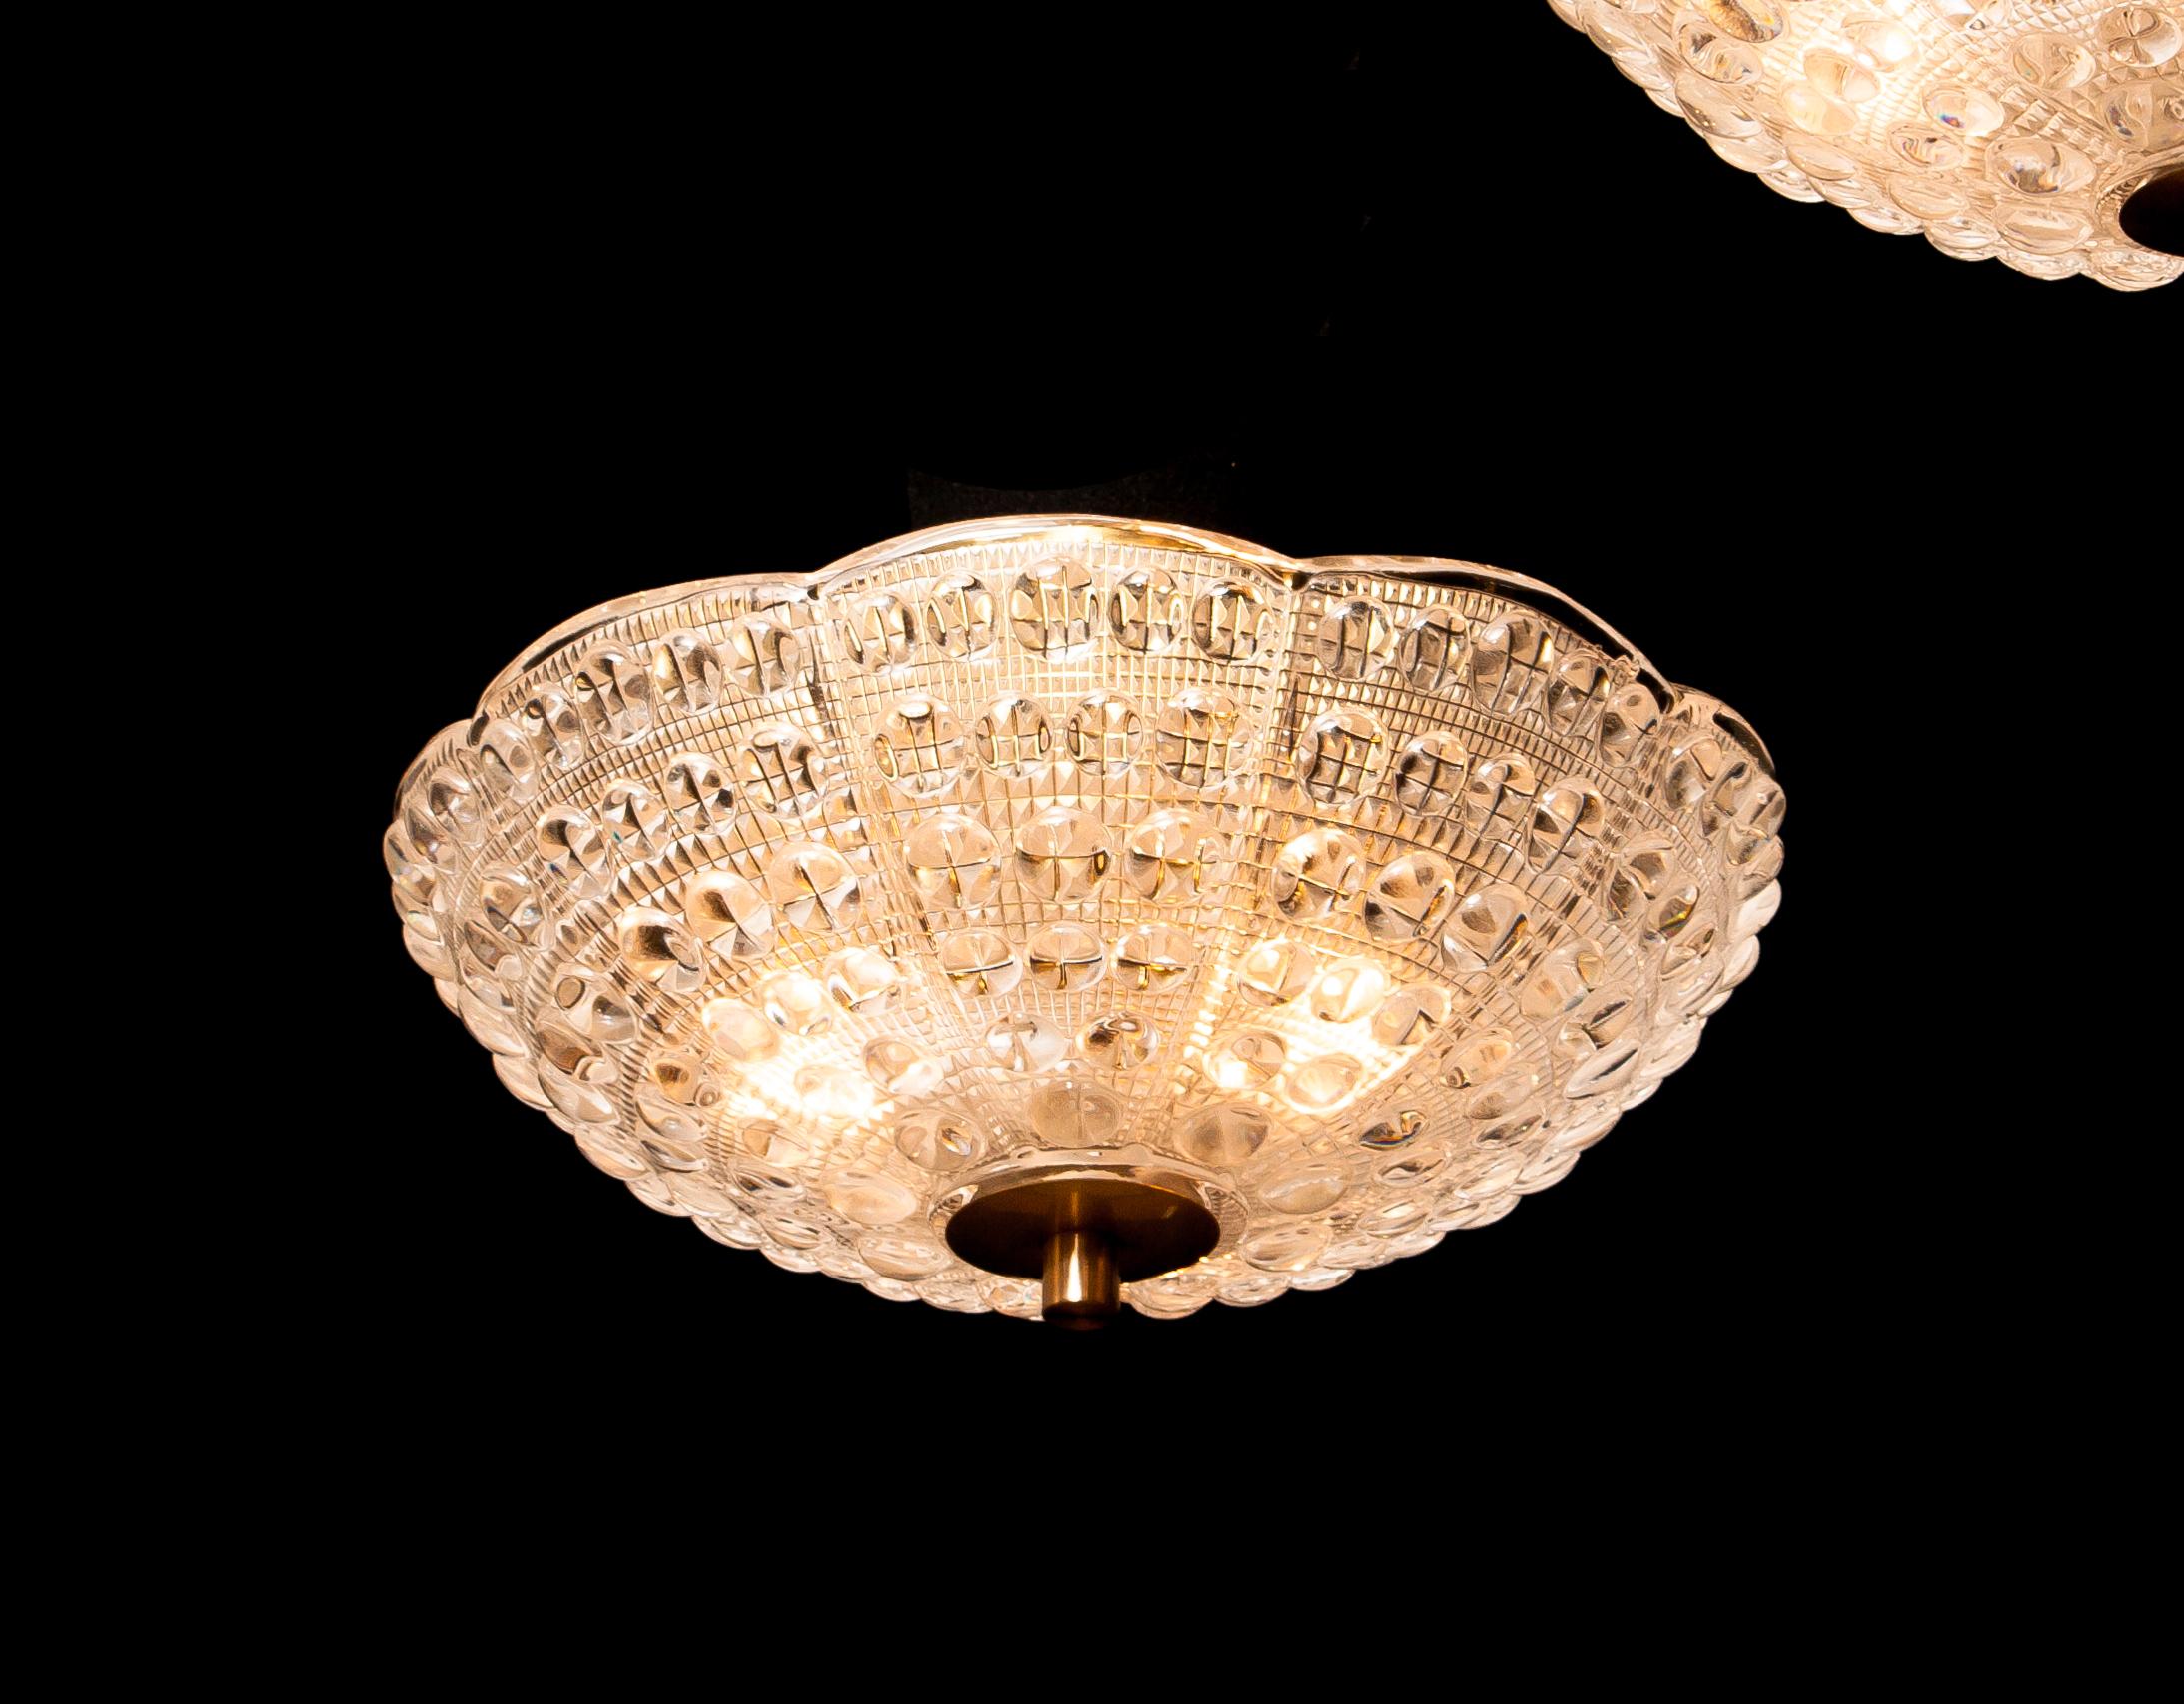 Beautiful ceiling light designed by Carl Fagerlund for Orrefors, Sweden.
This pendant is made of crystal glass and brass.
It is in a wonderful working condition.
Period 1960s.
Dimensions: H 20 cm, ø 36 cm.